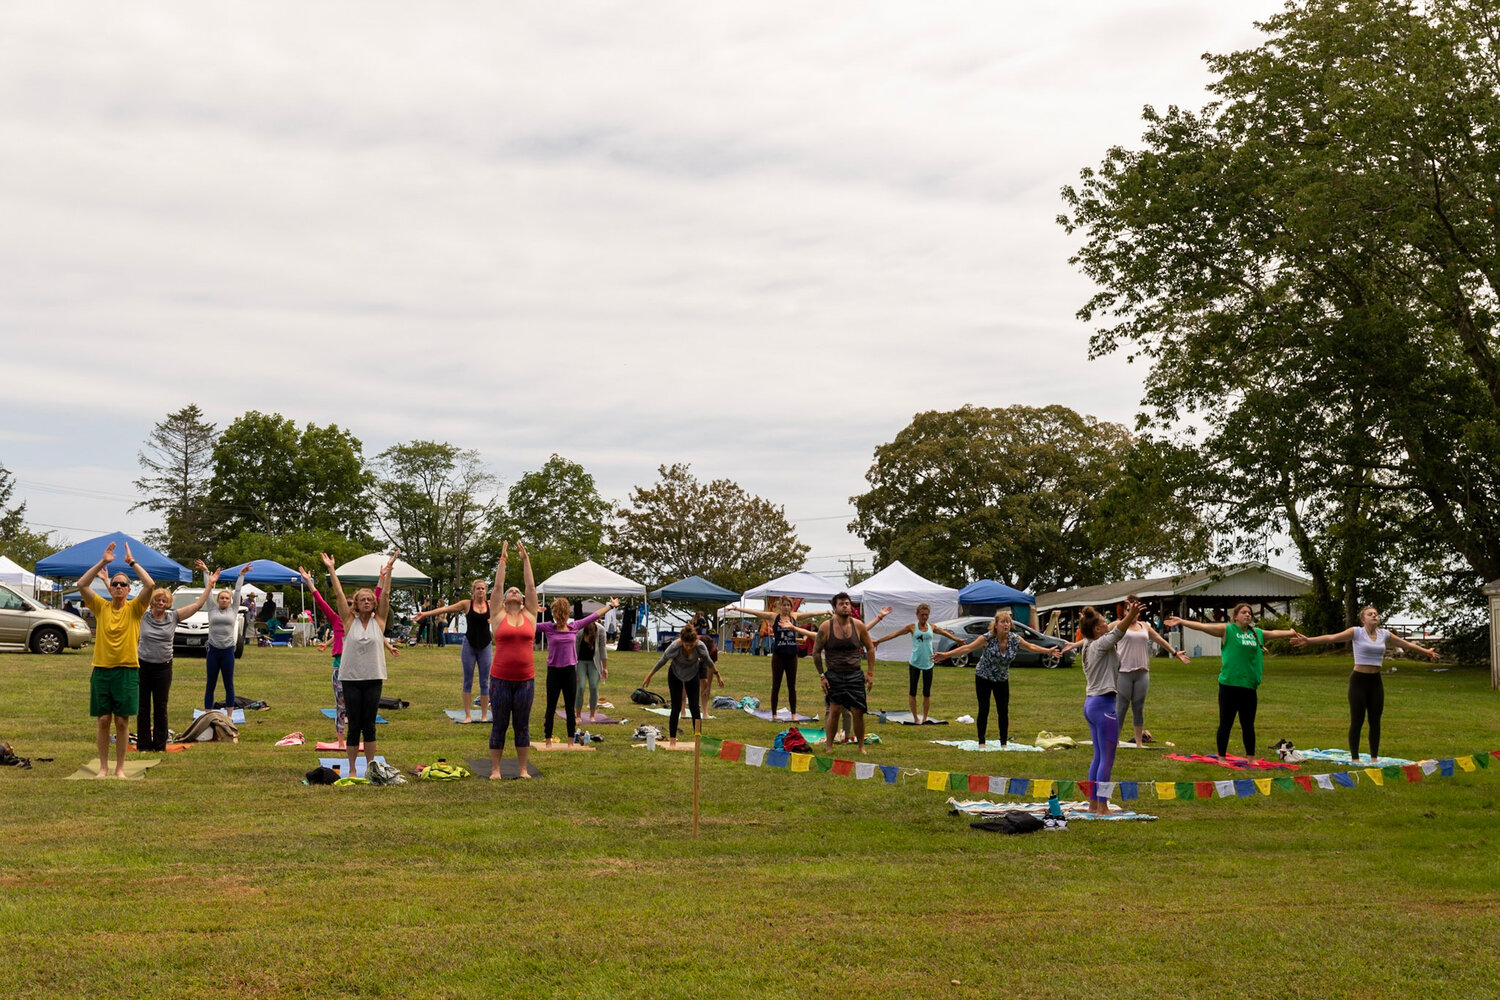 The Mini-Firefly Wellness Market takes place this Sunday in Tiverton